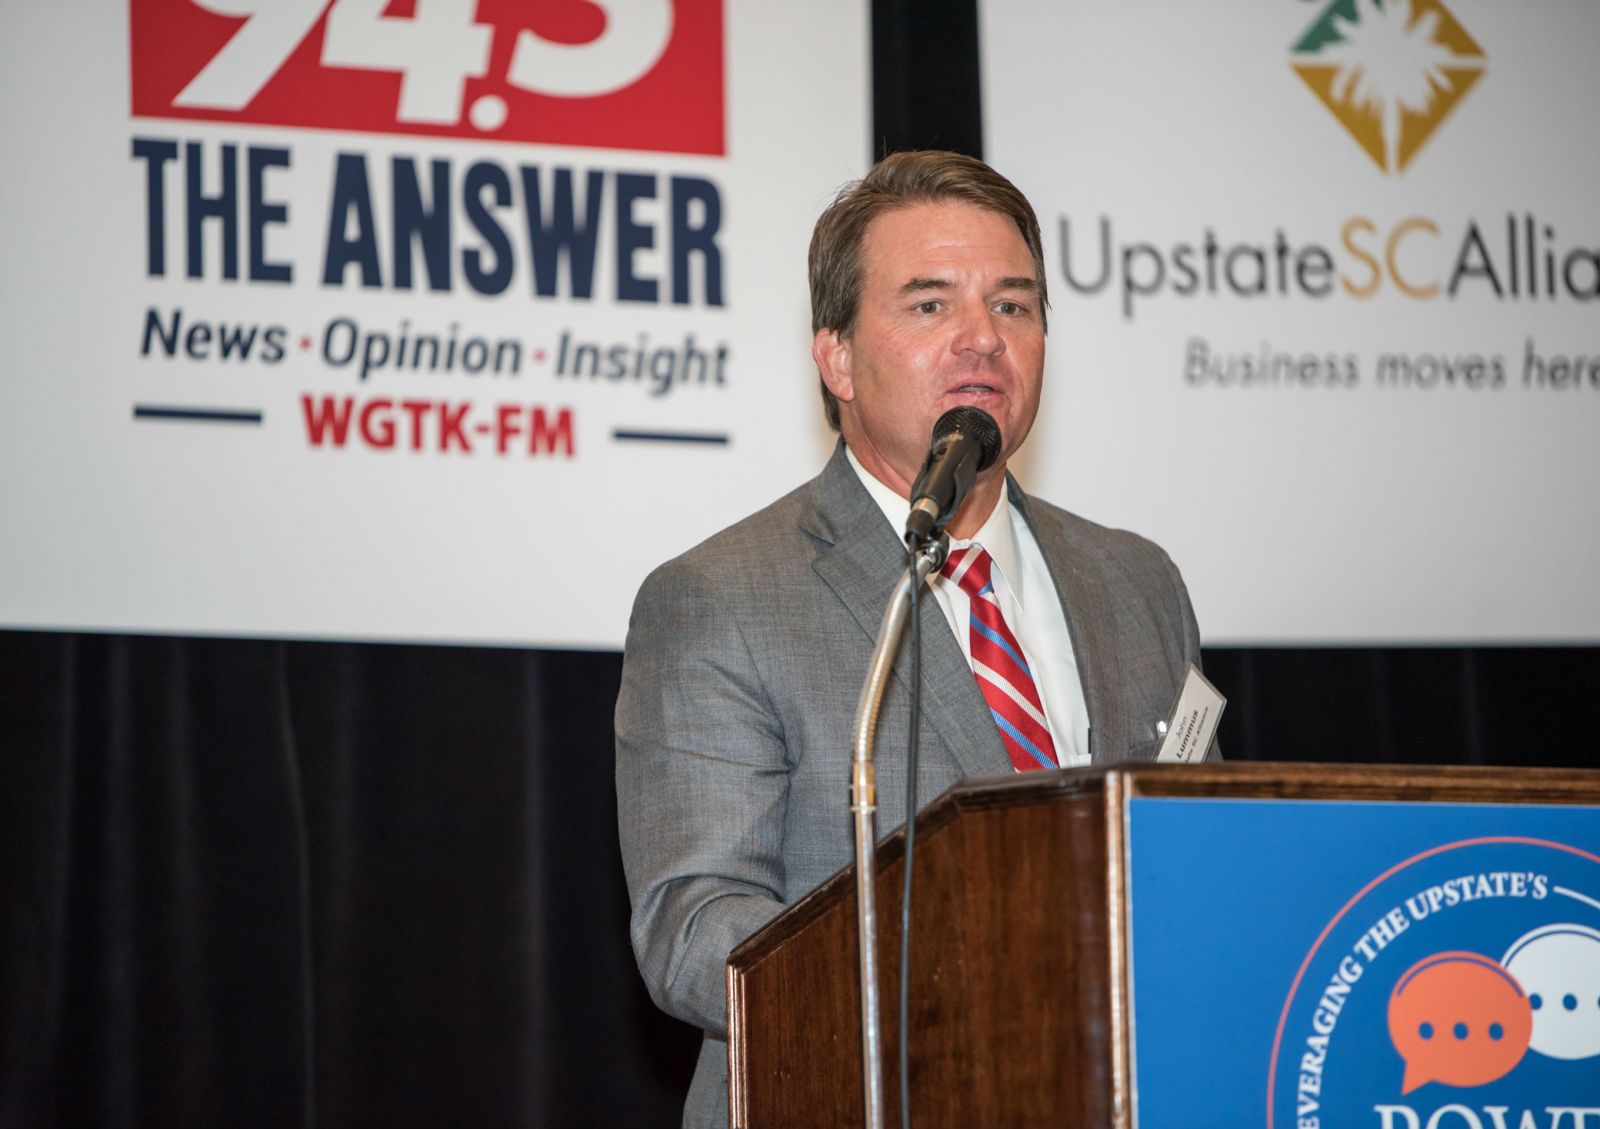 John Lummus, president and CEO of the Upstate SC Alliance, talked about the changing economy during a GSA Business Report power event. (Photo/Kathy Allen)